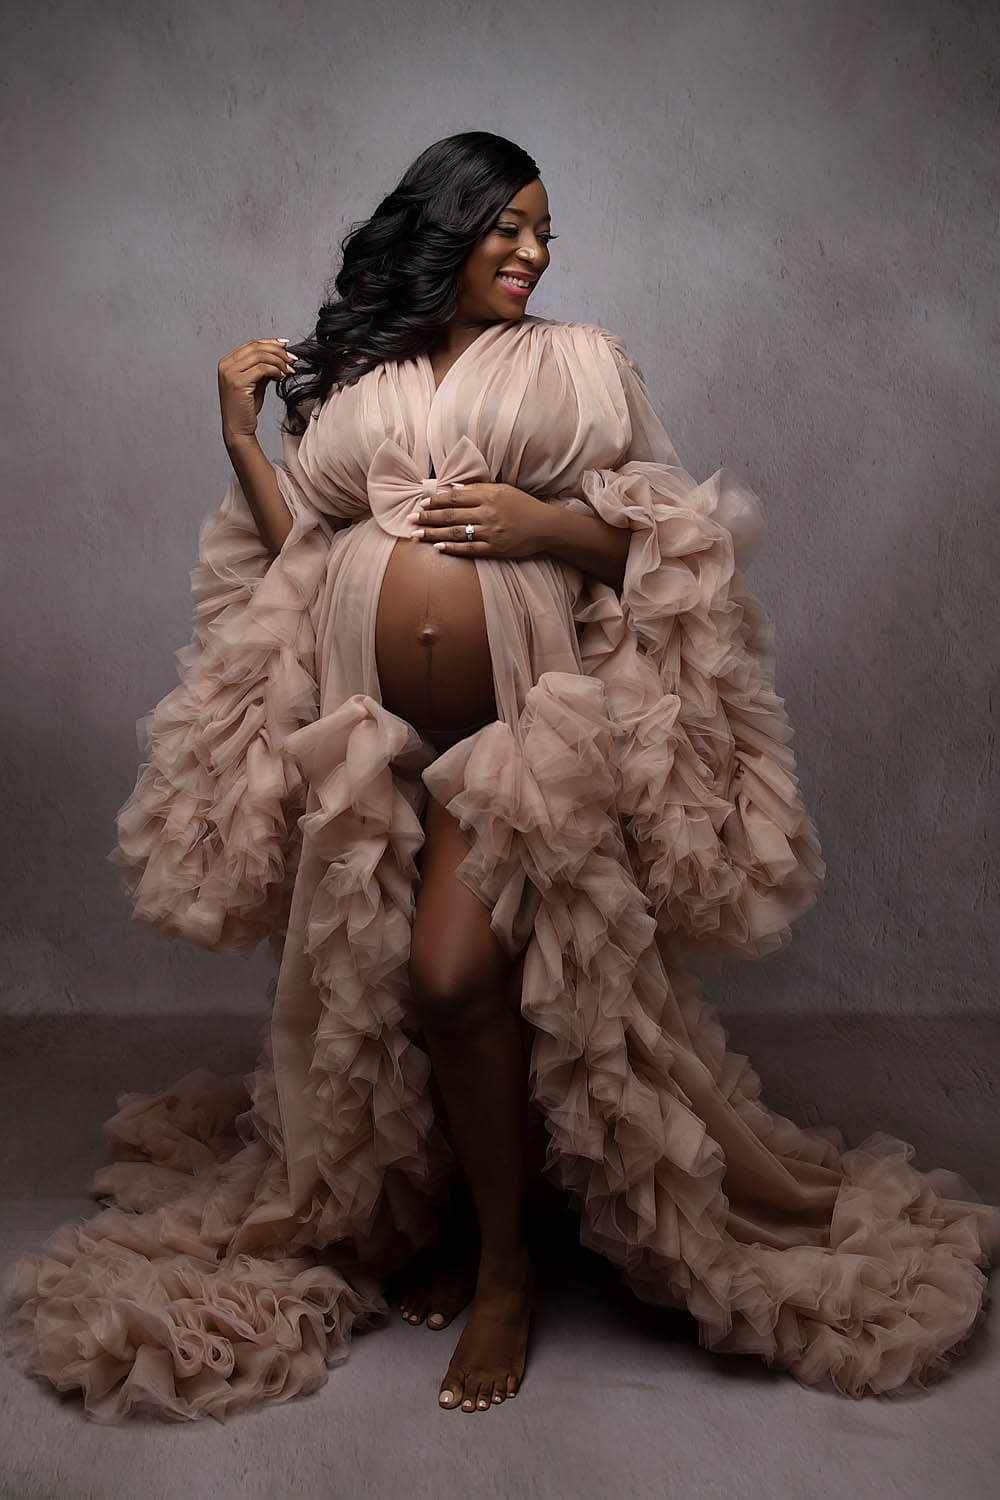 black woman wearing robe for maternity picture in pembroke pines, FL